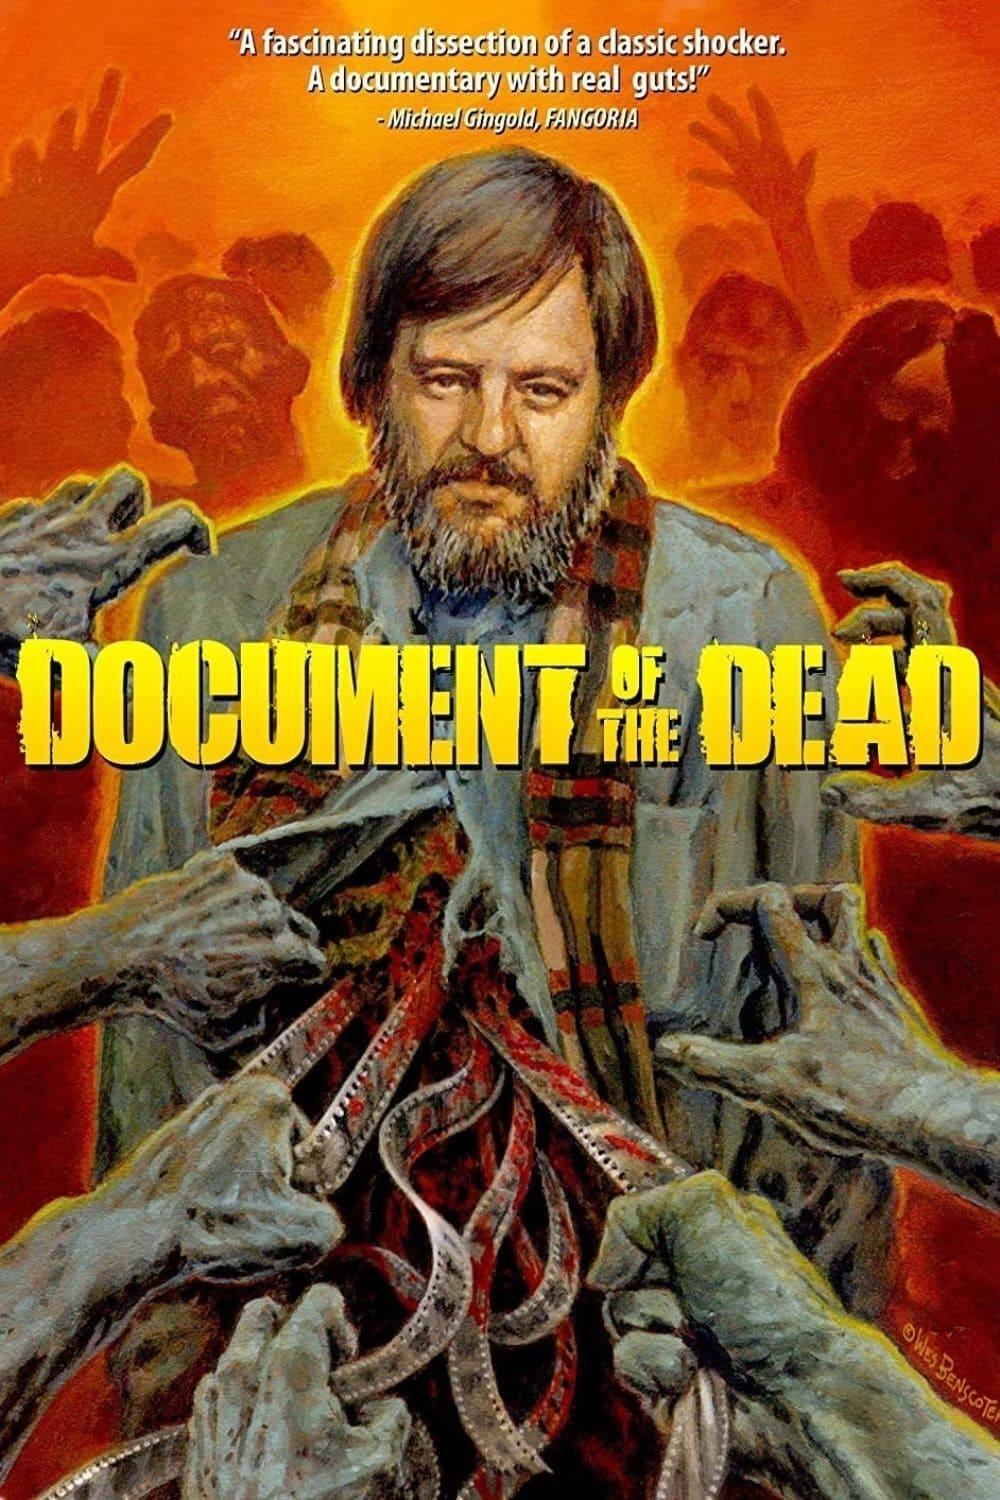 Document of the Dead poster